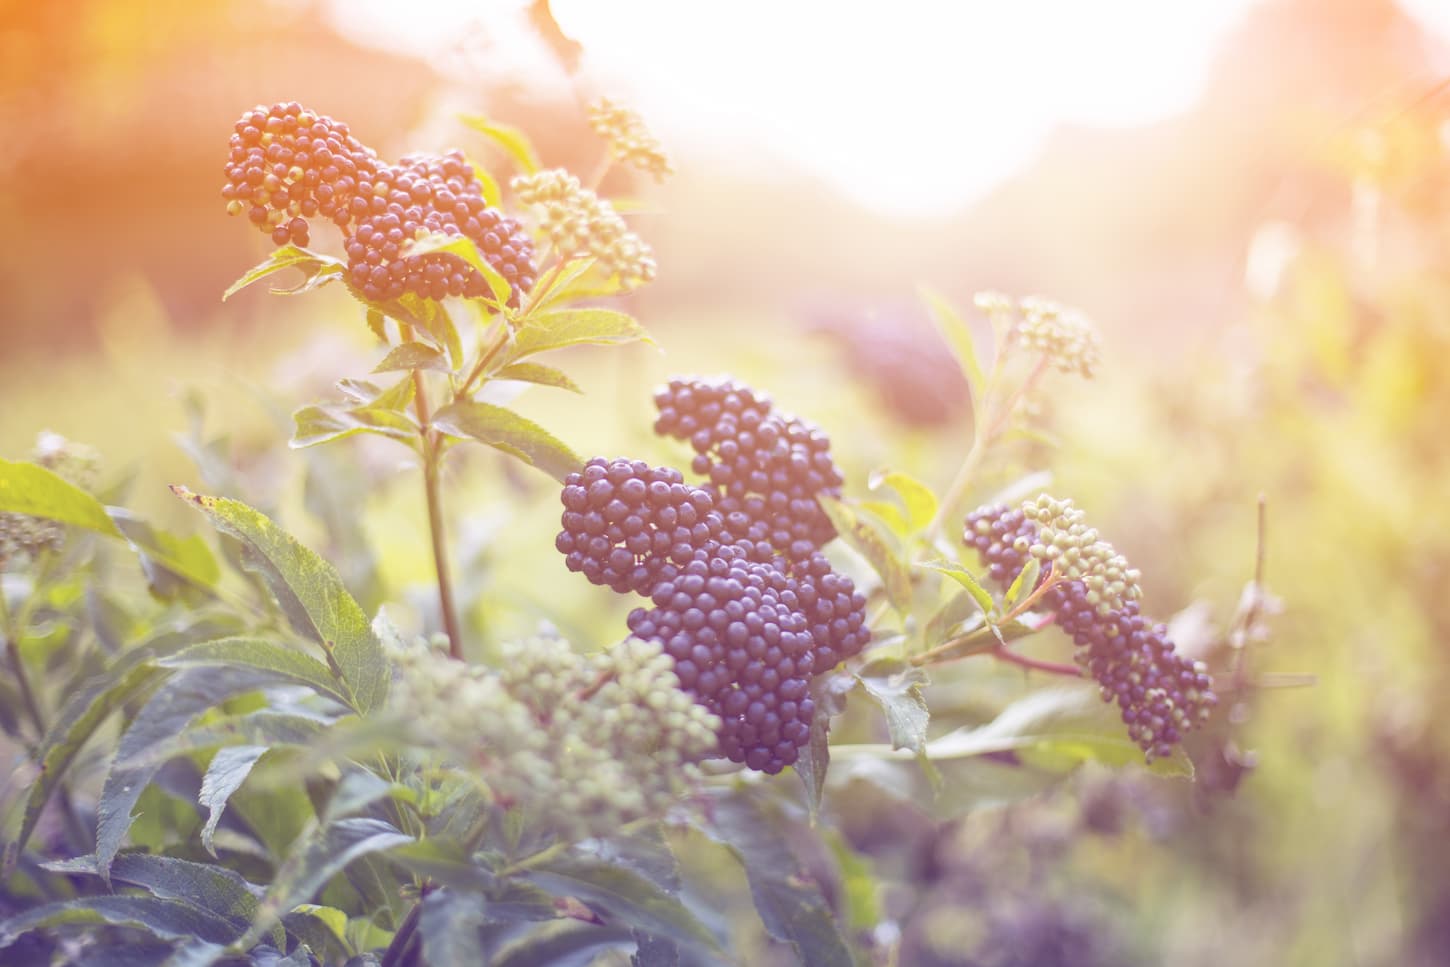 An image of a blackberry plant with berries during summer.